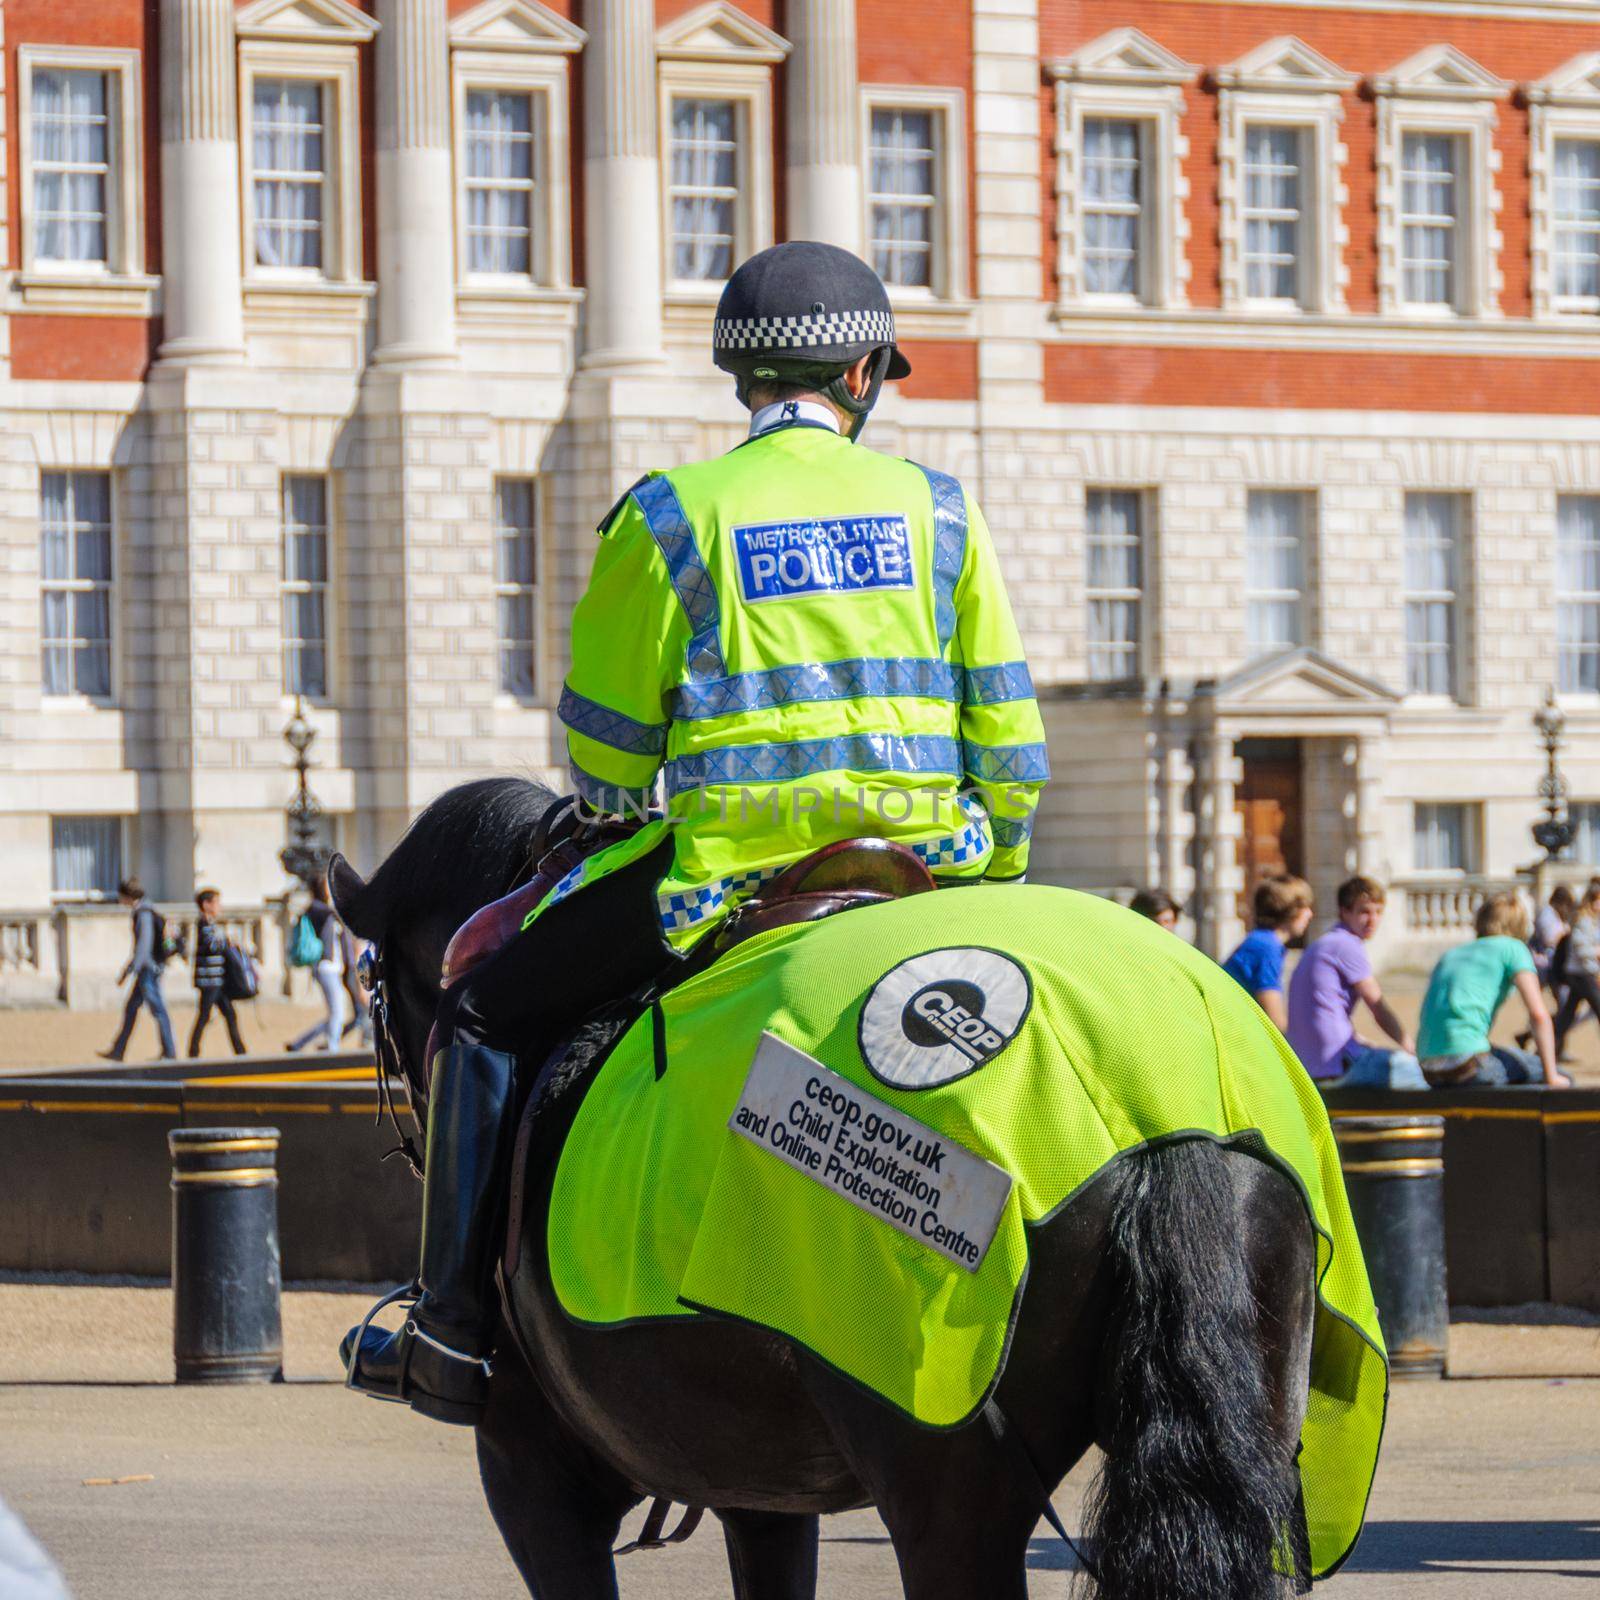 Mounted police officer in London, England, UK by dutourdumonde